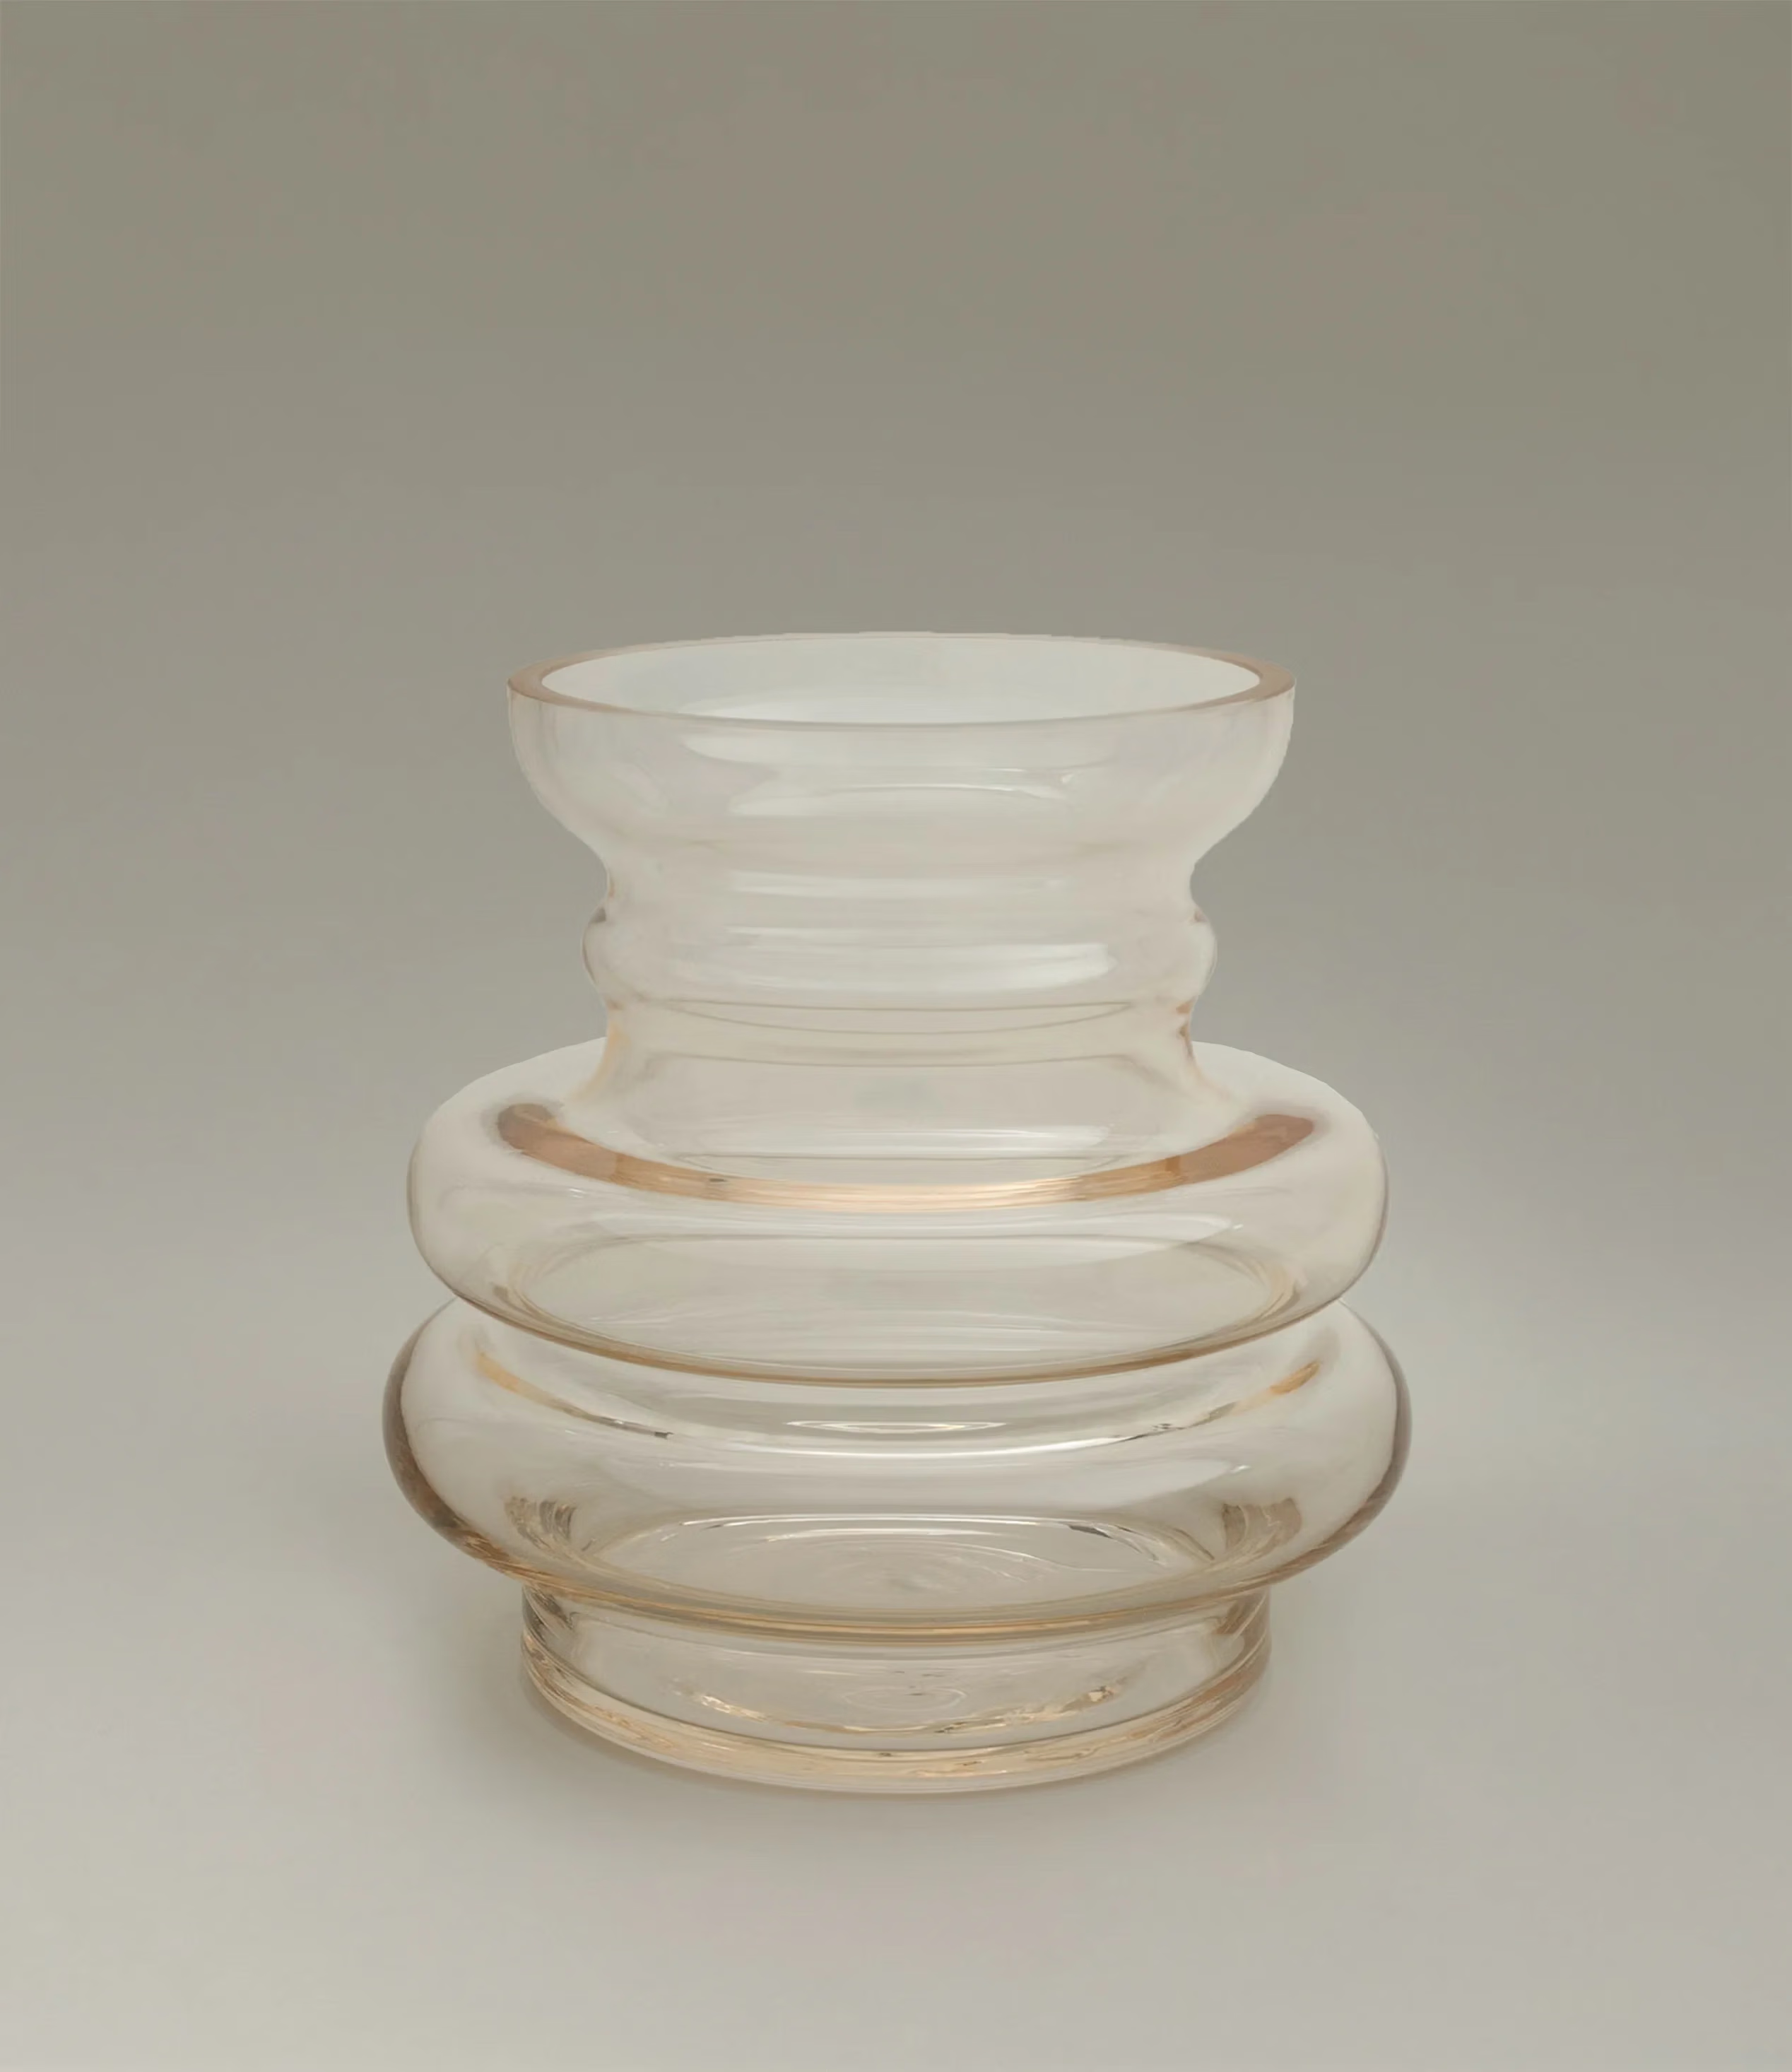 Curve Vase Gul from Stences is a glass vase which has a hint of beige color on it. Still very transparent and glossy.